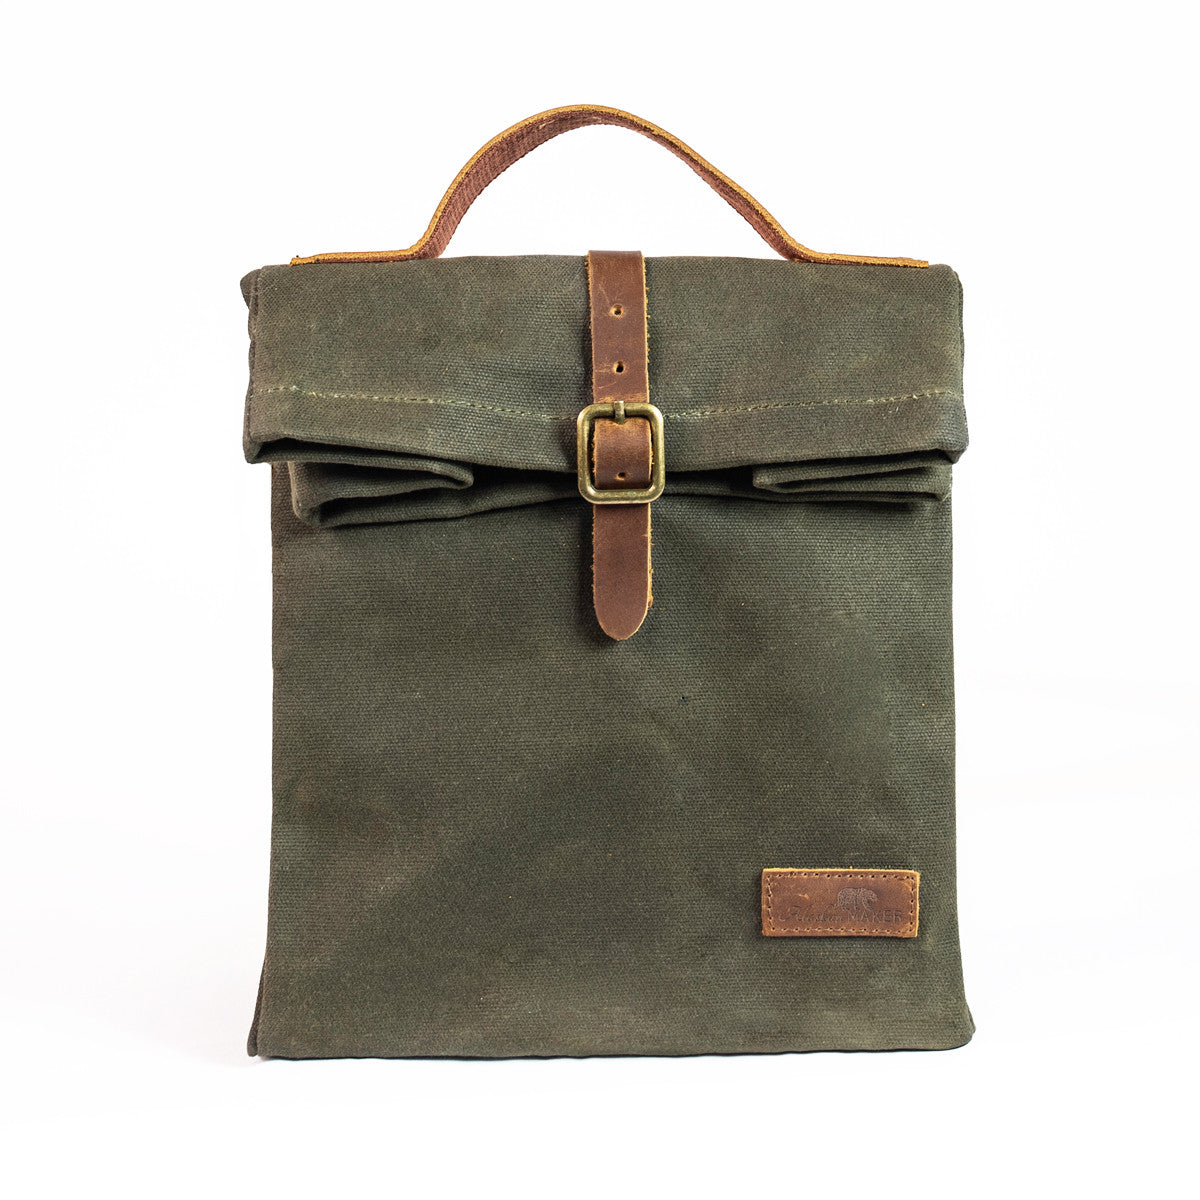 Khaki waxed canvas lunch cool bag with leather strap and buckle